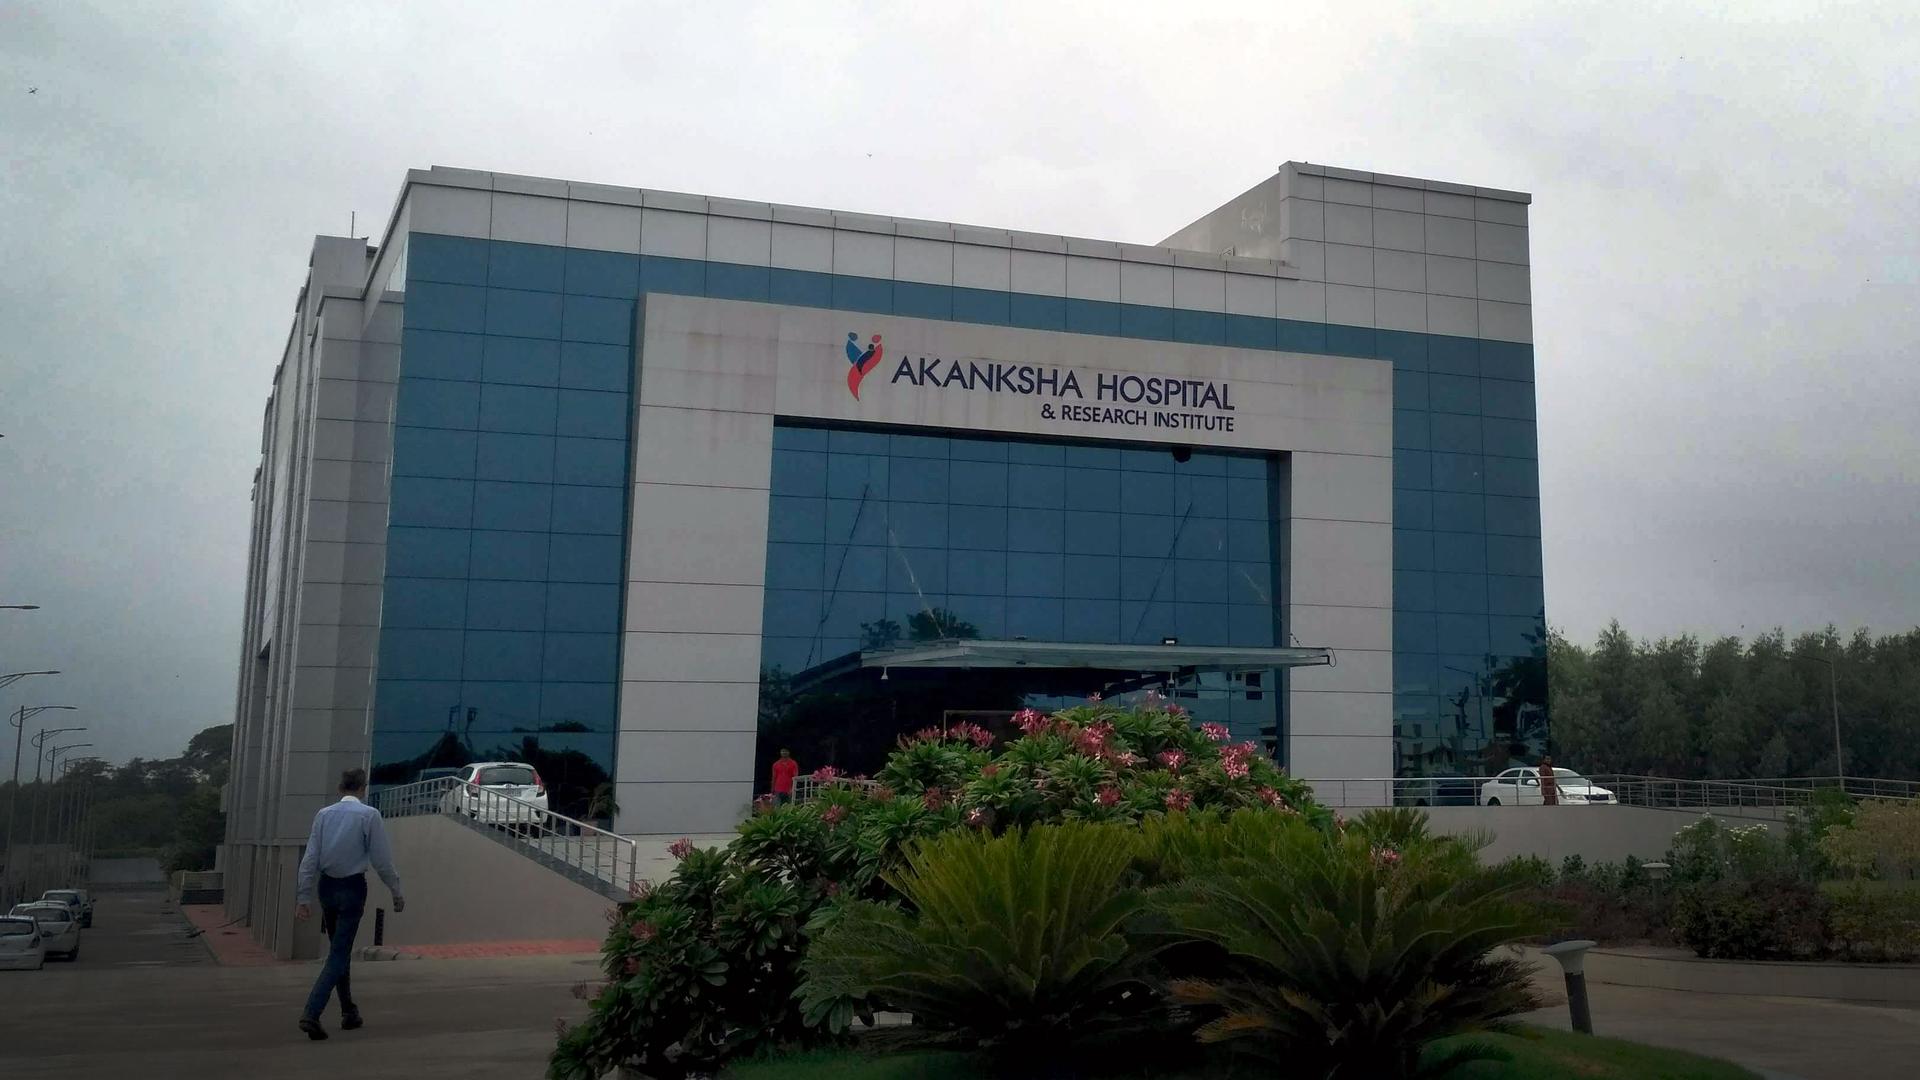 A large hospital building has the sign Akanksah Hospital on the side